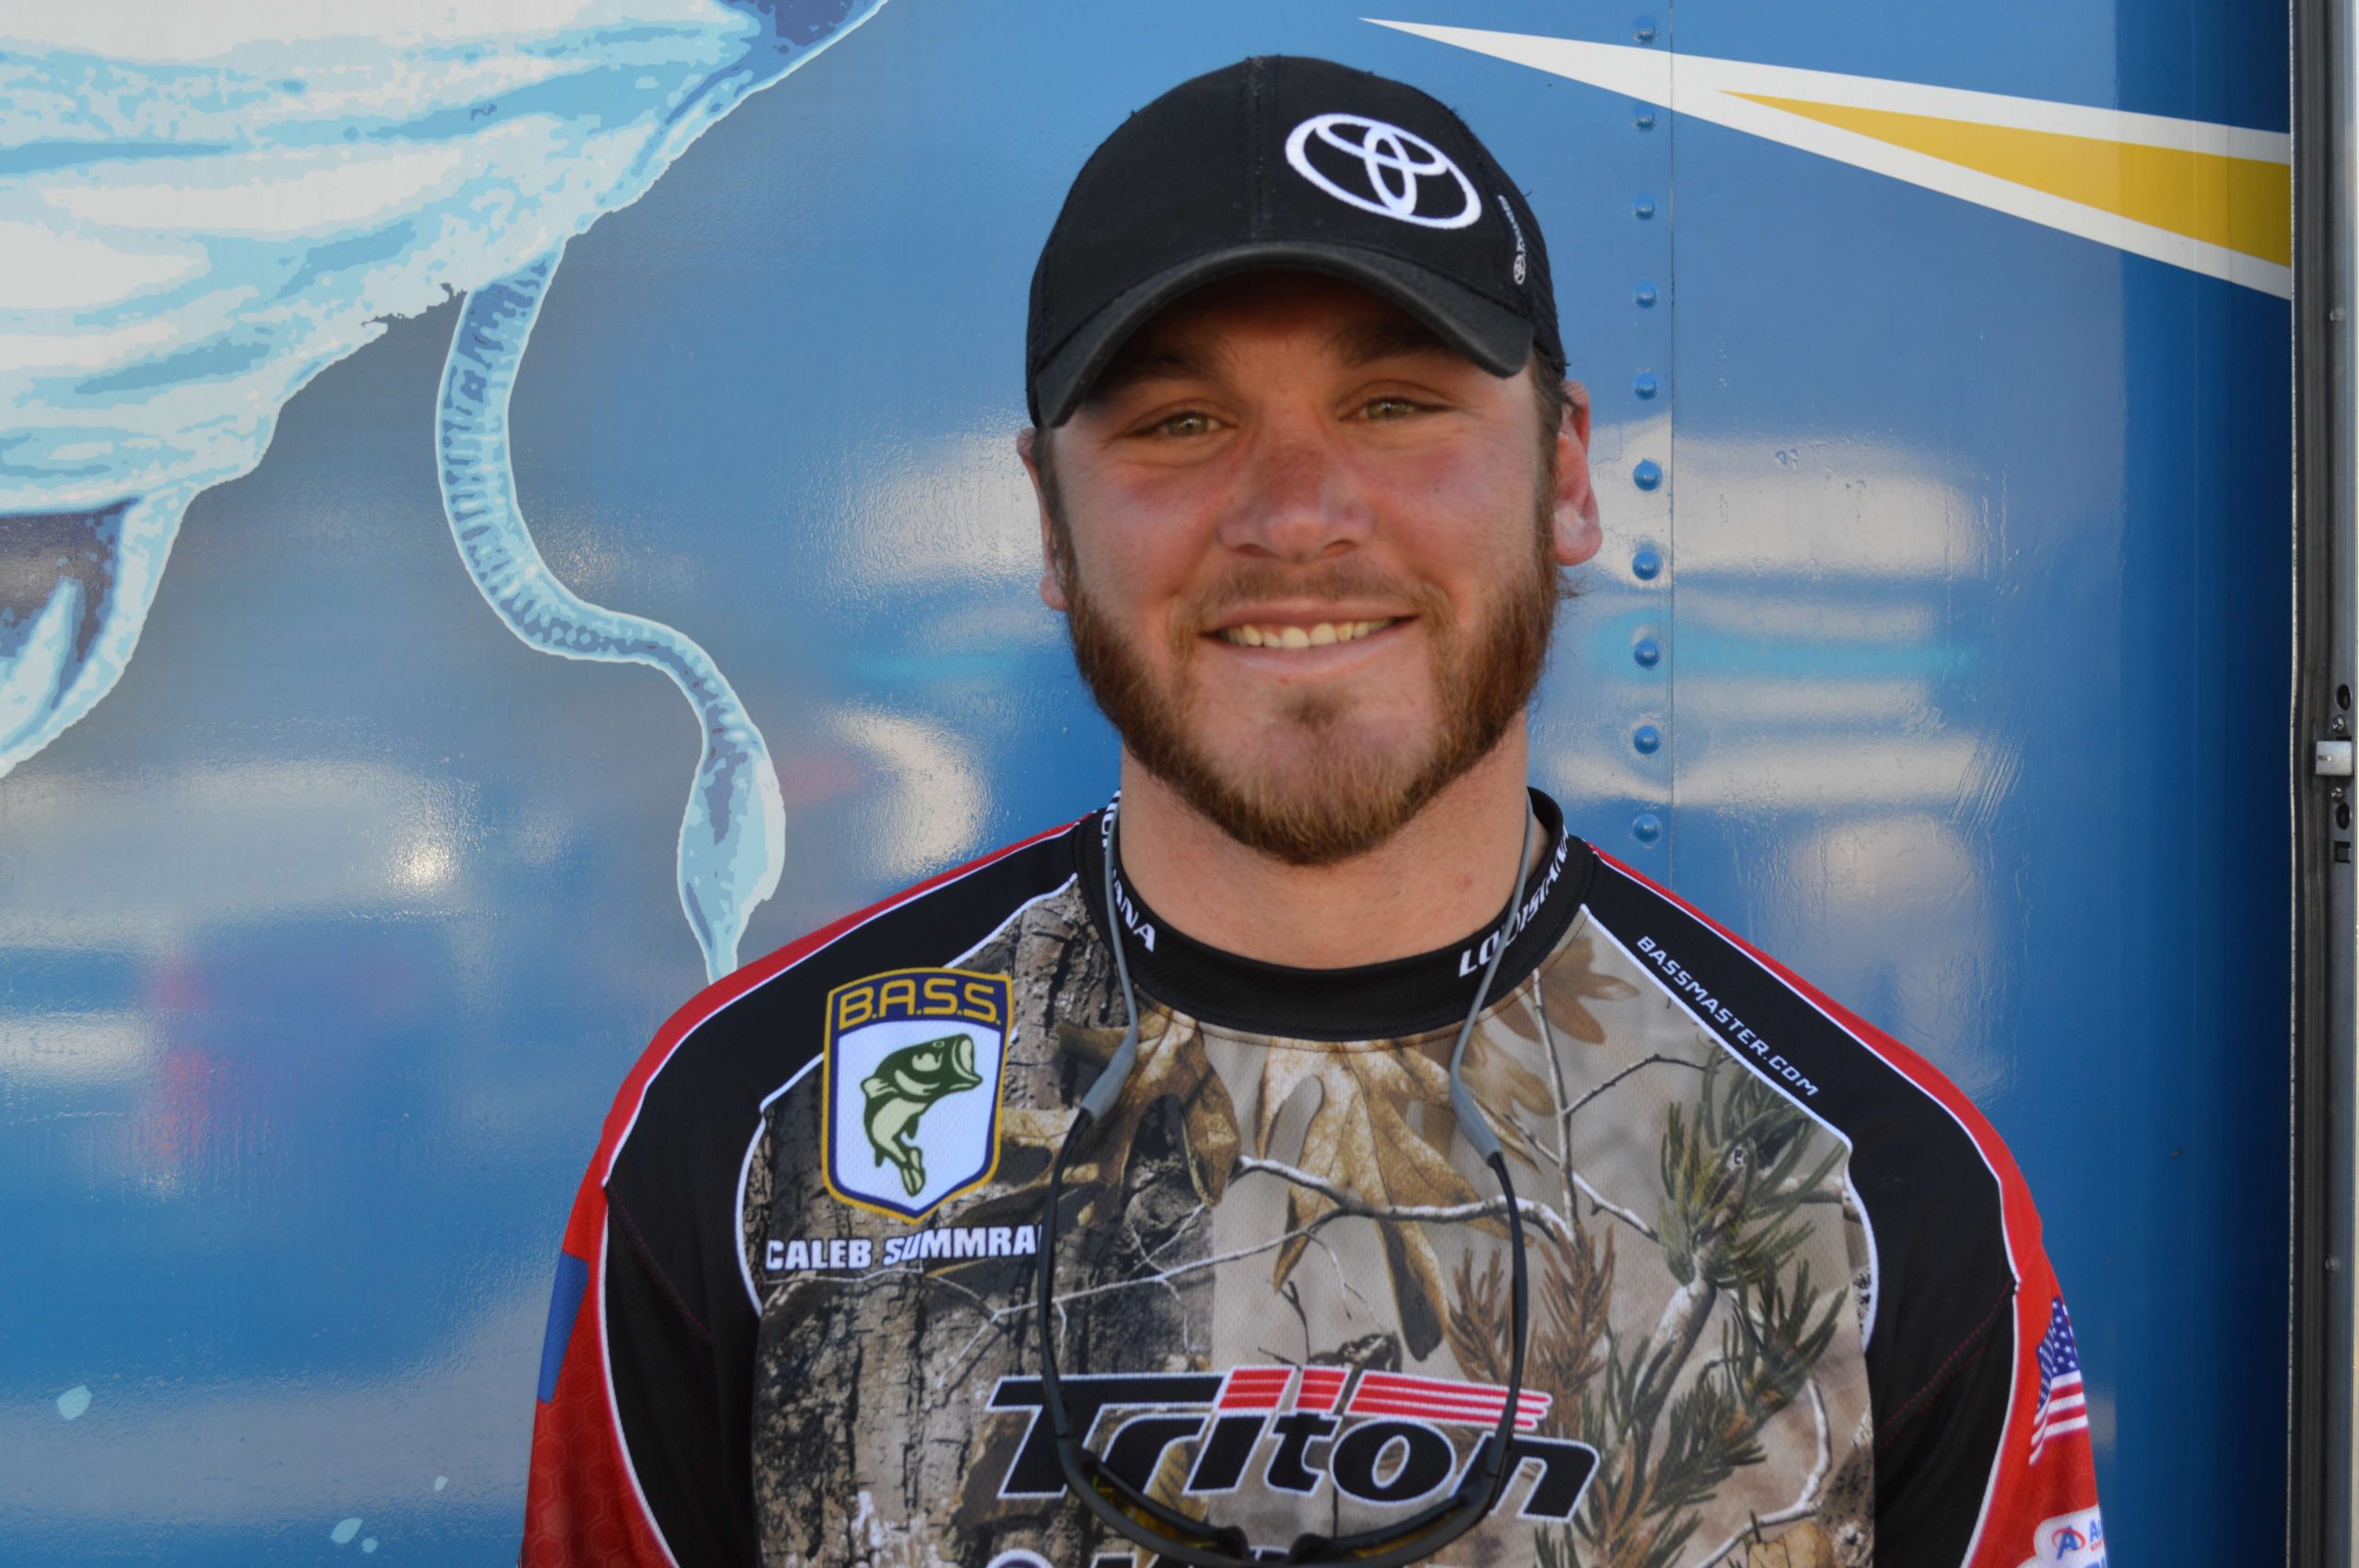 <h4>
Caleb	Sumrall</h4>
Louisiana Boater<br>
B.A.S.S. Nation Club: Atchafalaya Bassmasters<BR>
Hobbies: Deer hunting and spending time outdoors<BR>
Sponsors: Missile Baits, Kajun Boss Outdoors, Kistler rods, K2 Coolers
